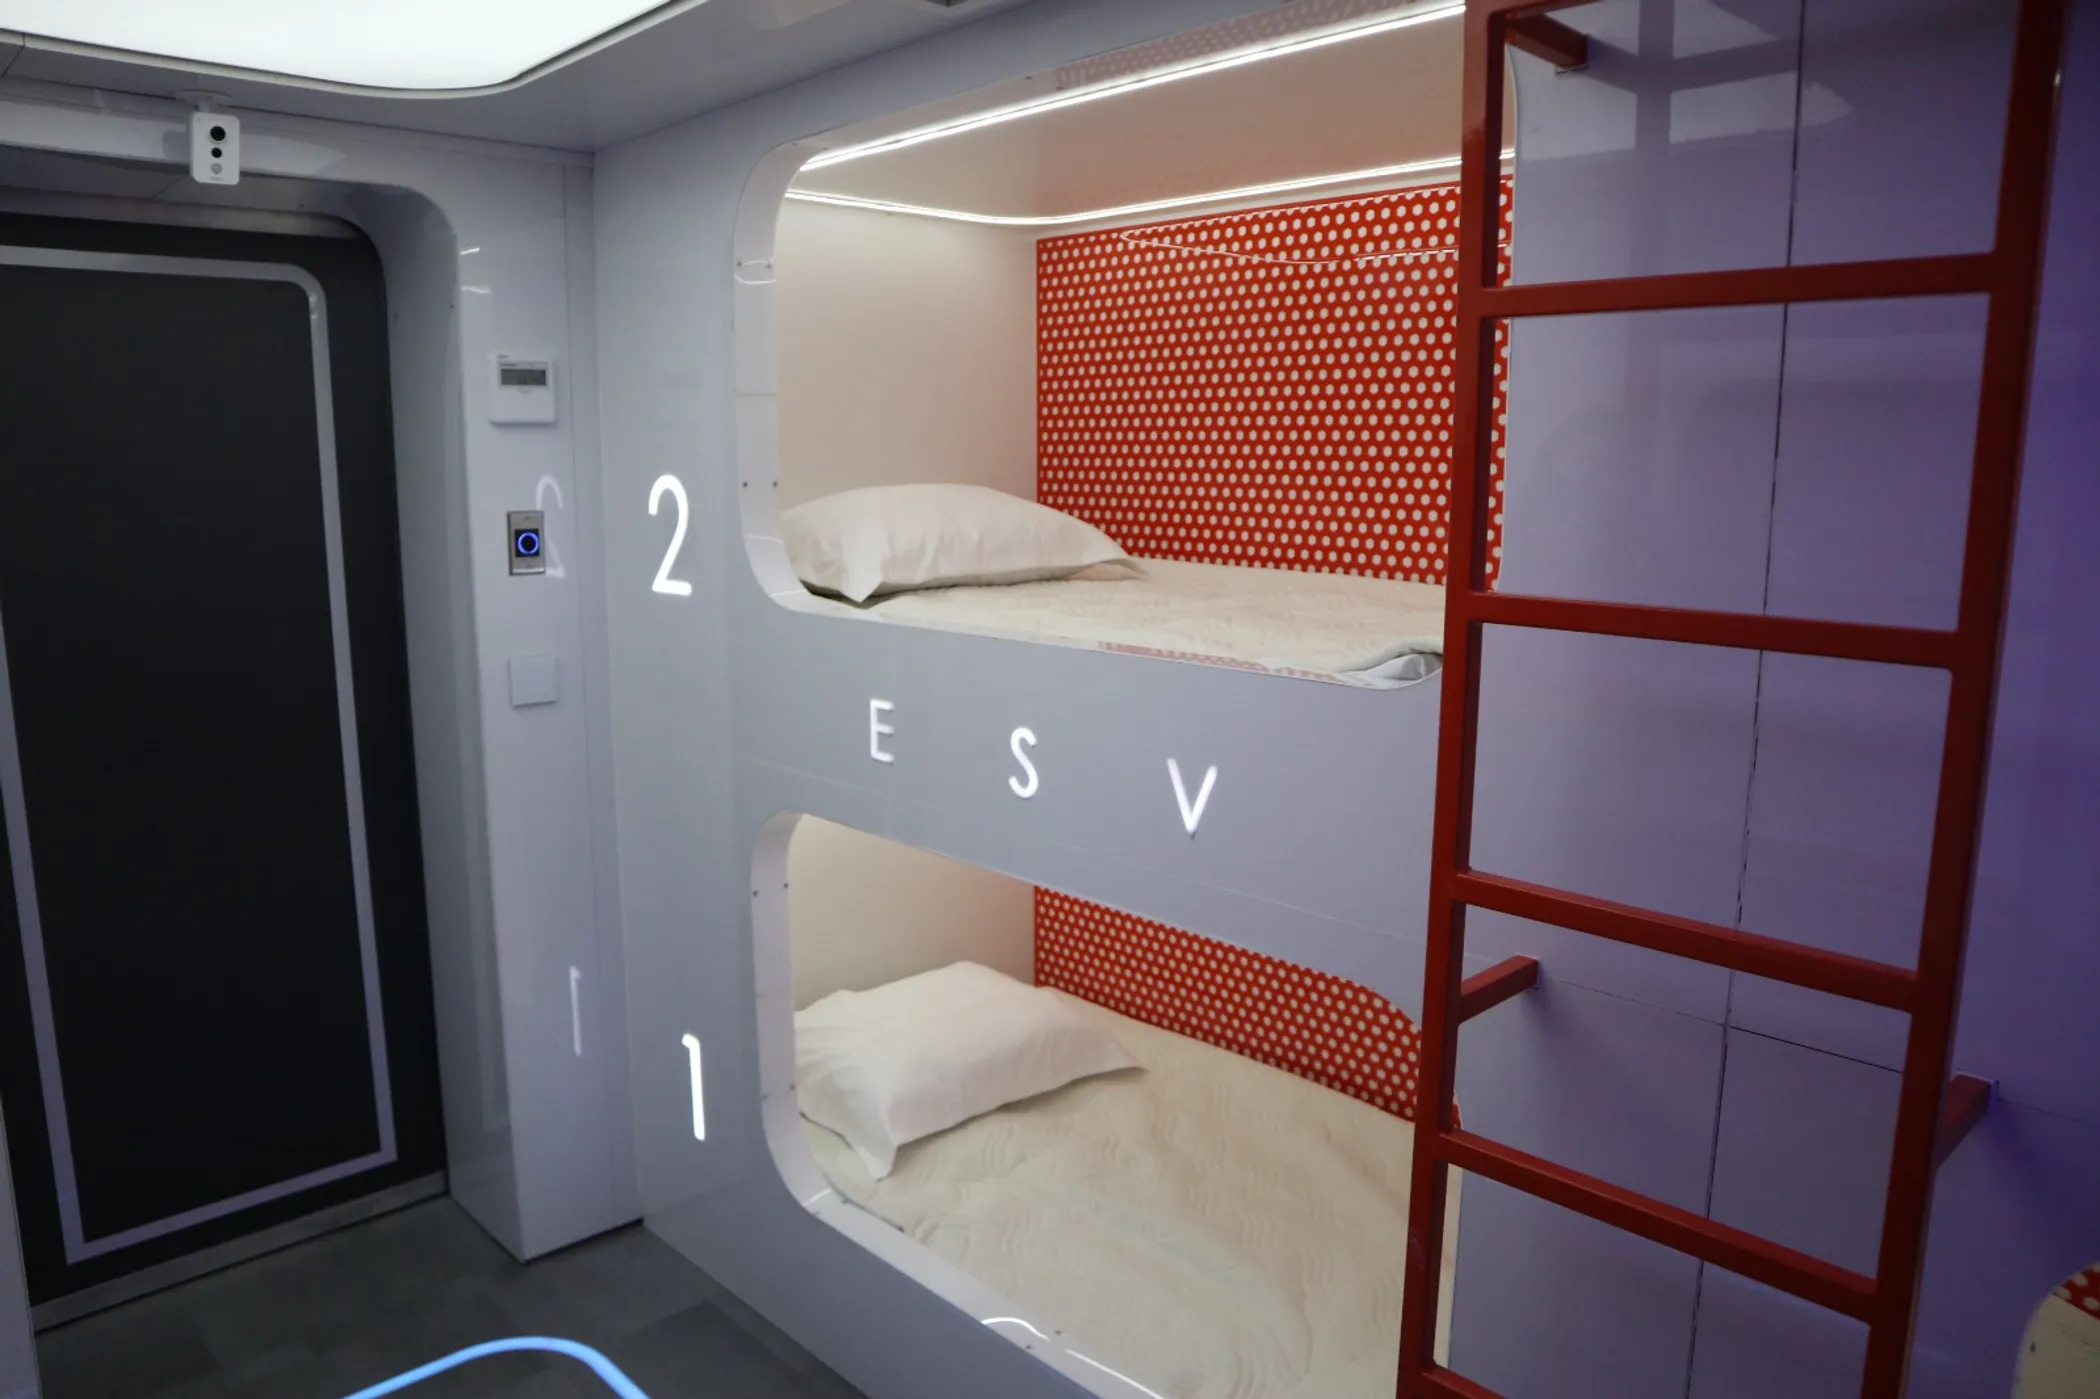 Numbered bunk beds in the living module of the SPACE NOMAD (photo credit: QazMonitor)